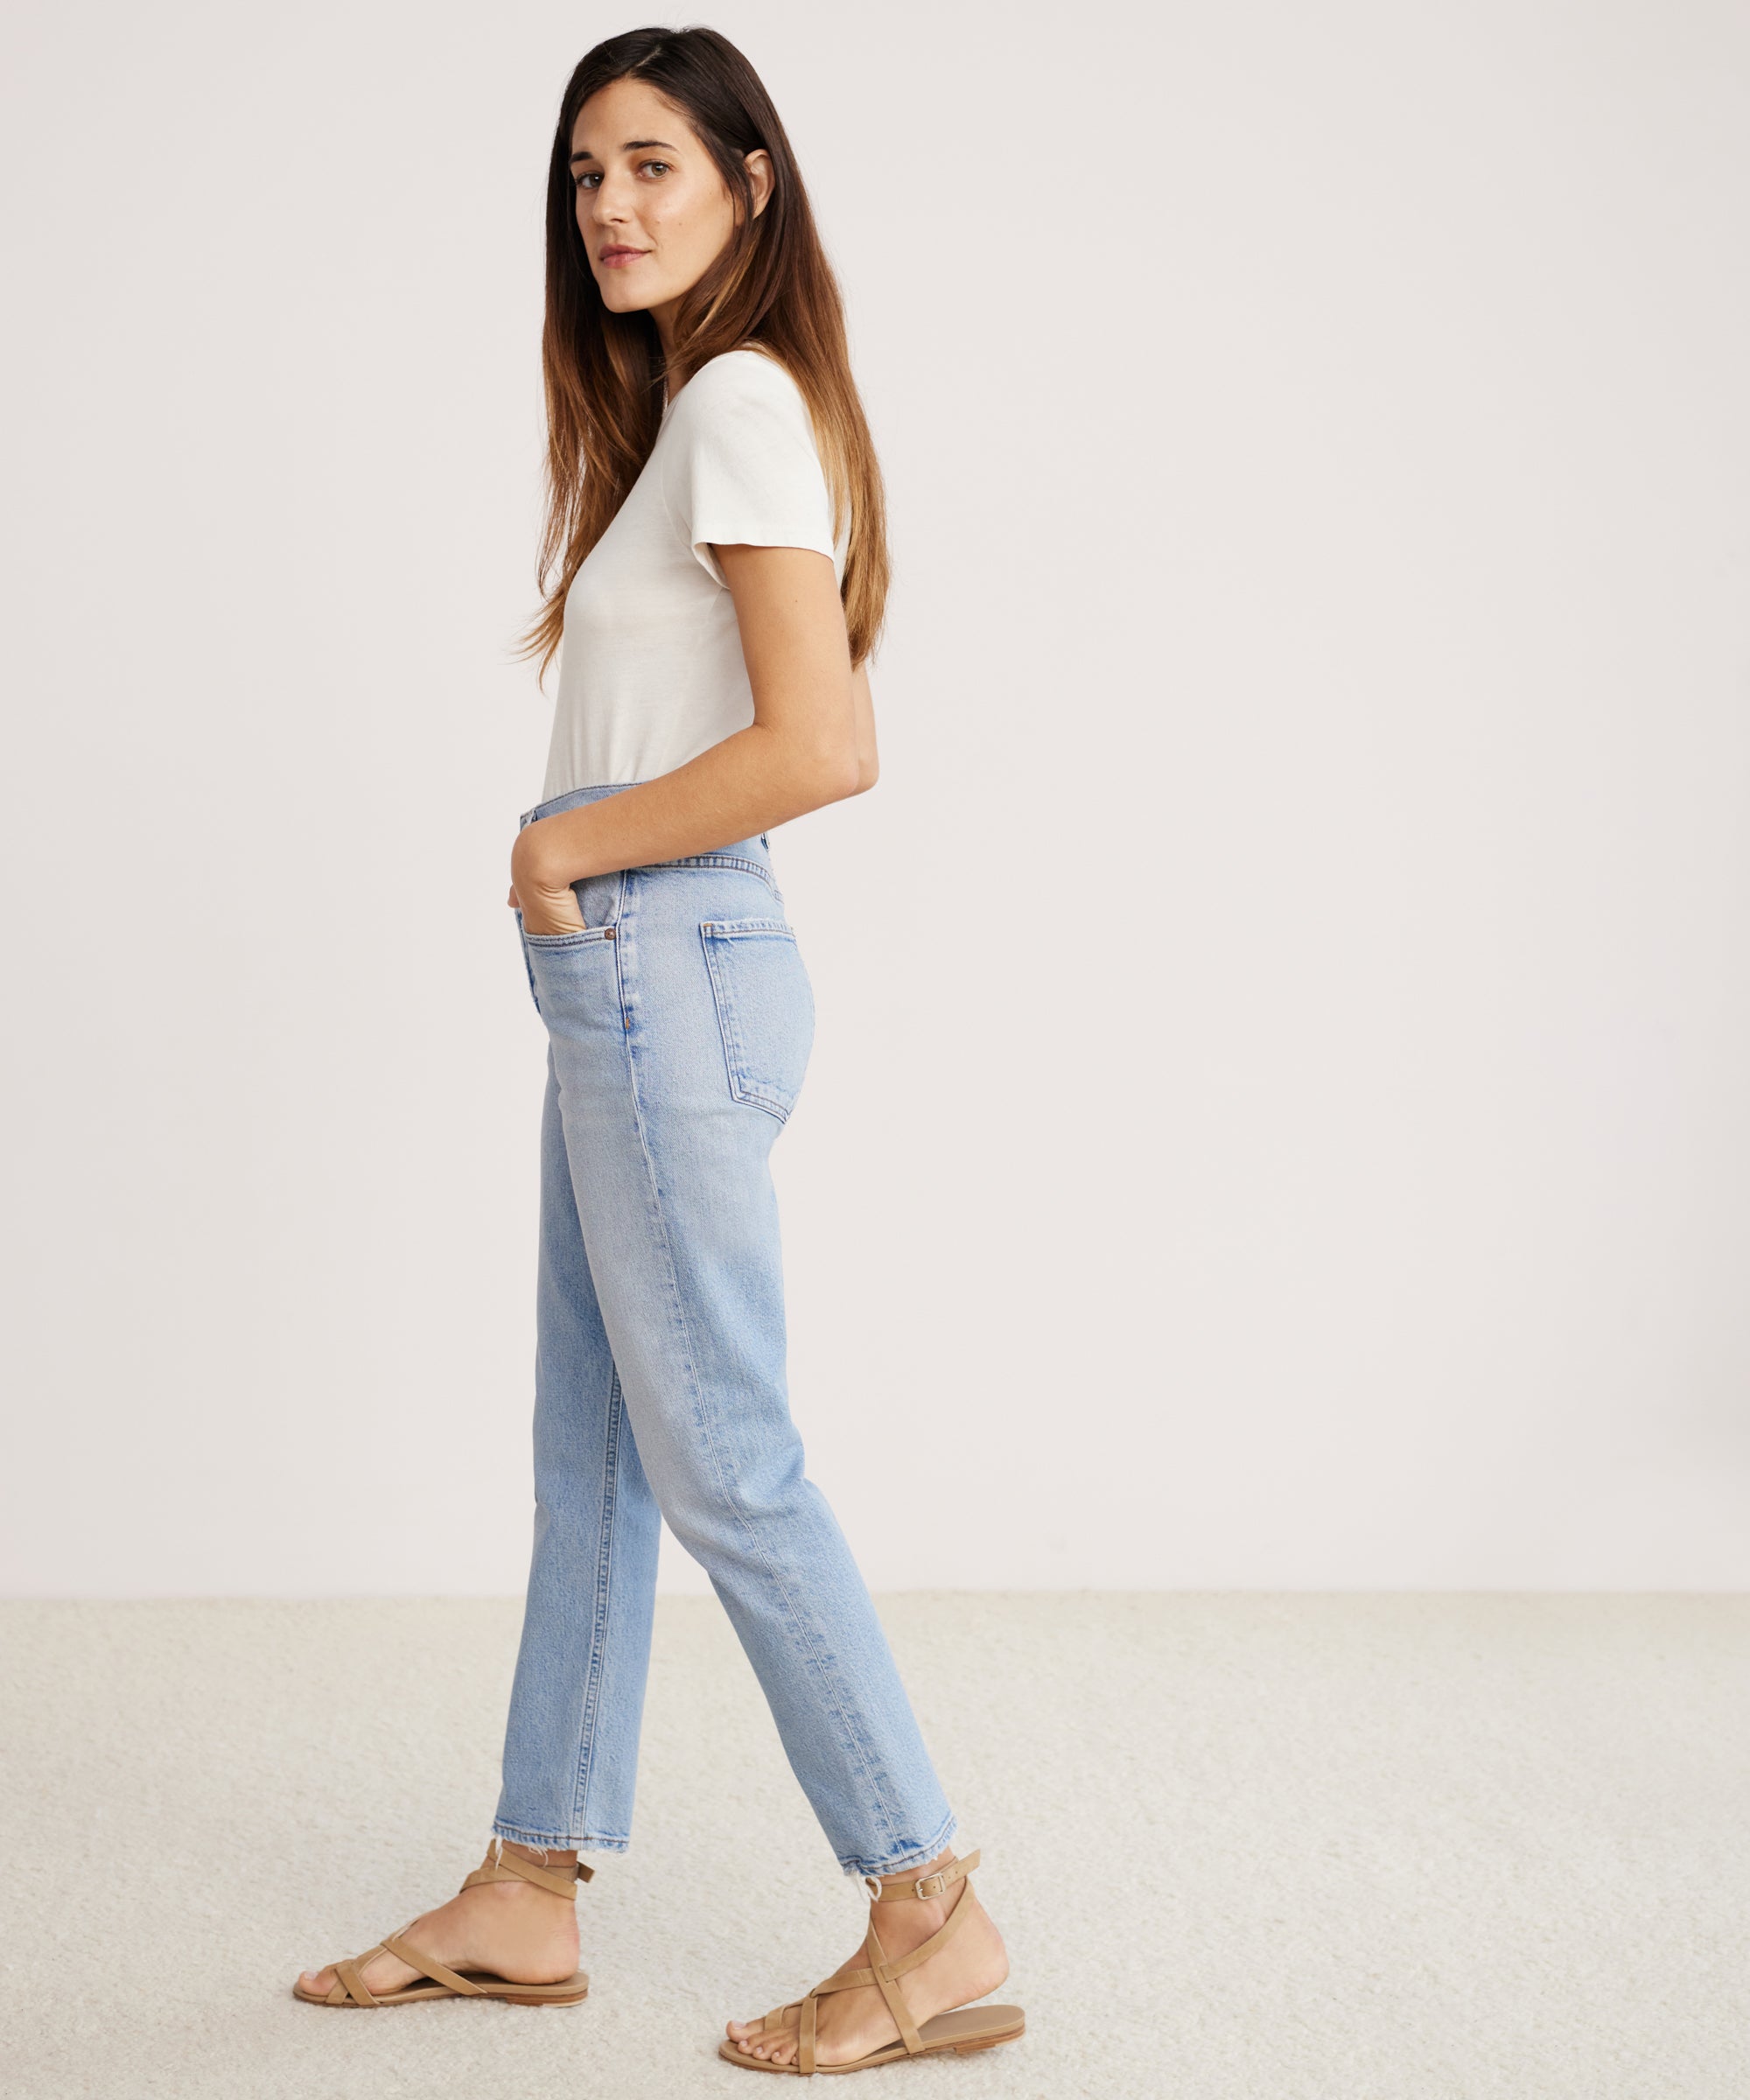 Women's Perfect Vintage Jean in Fitzgerald Wash